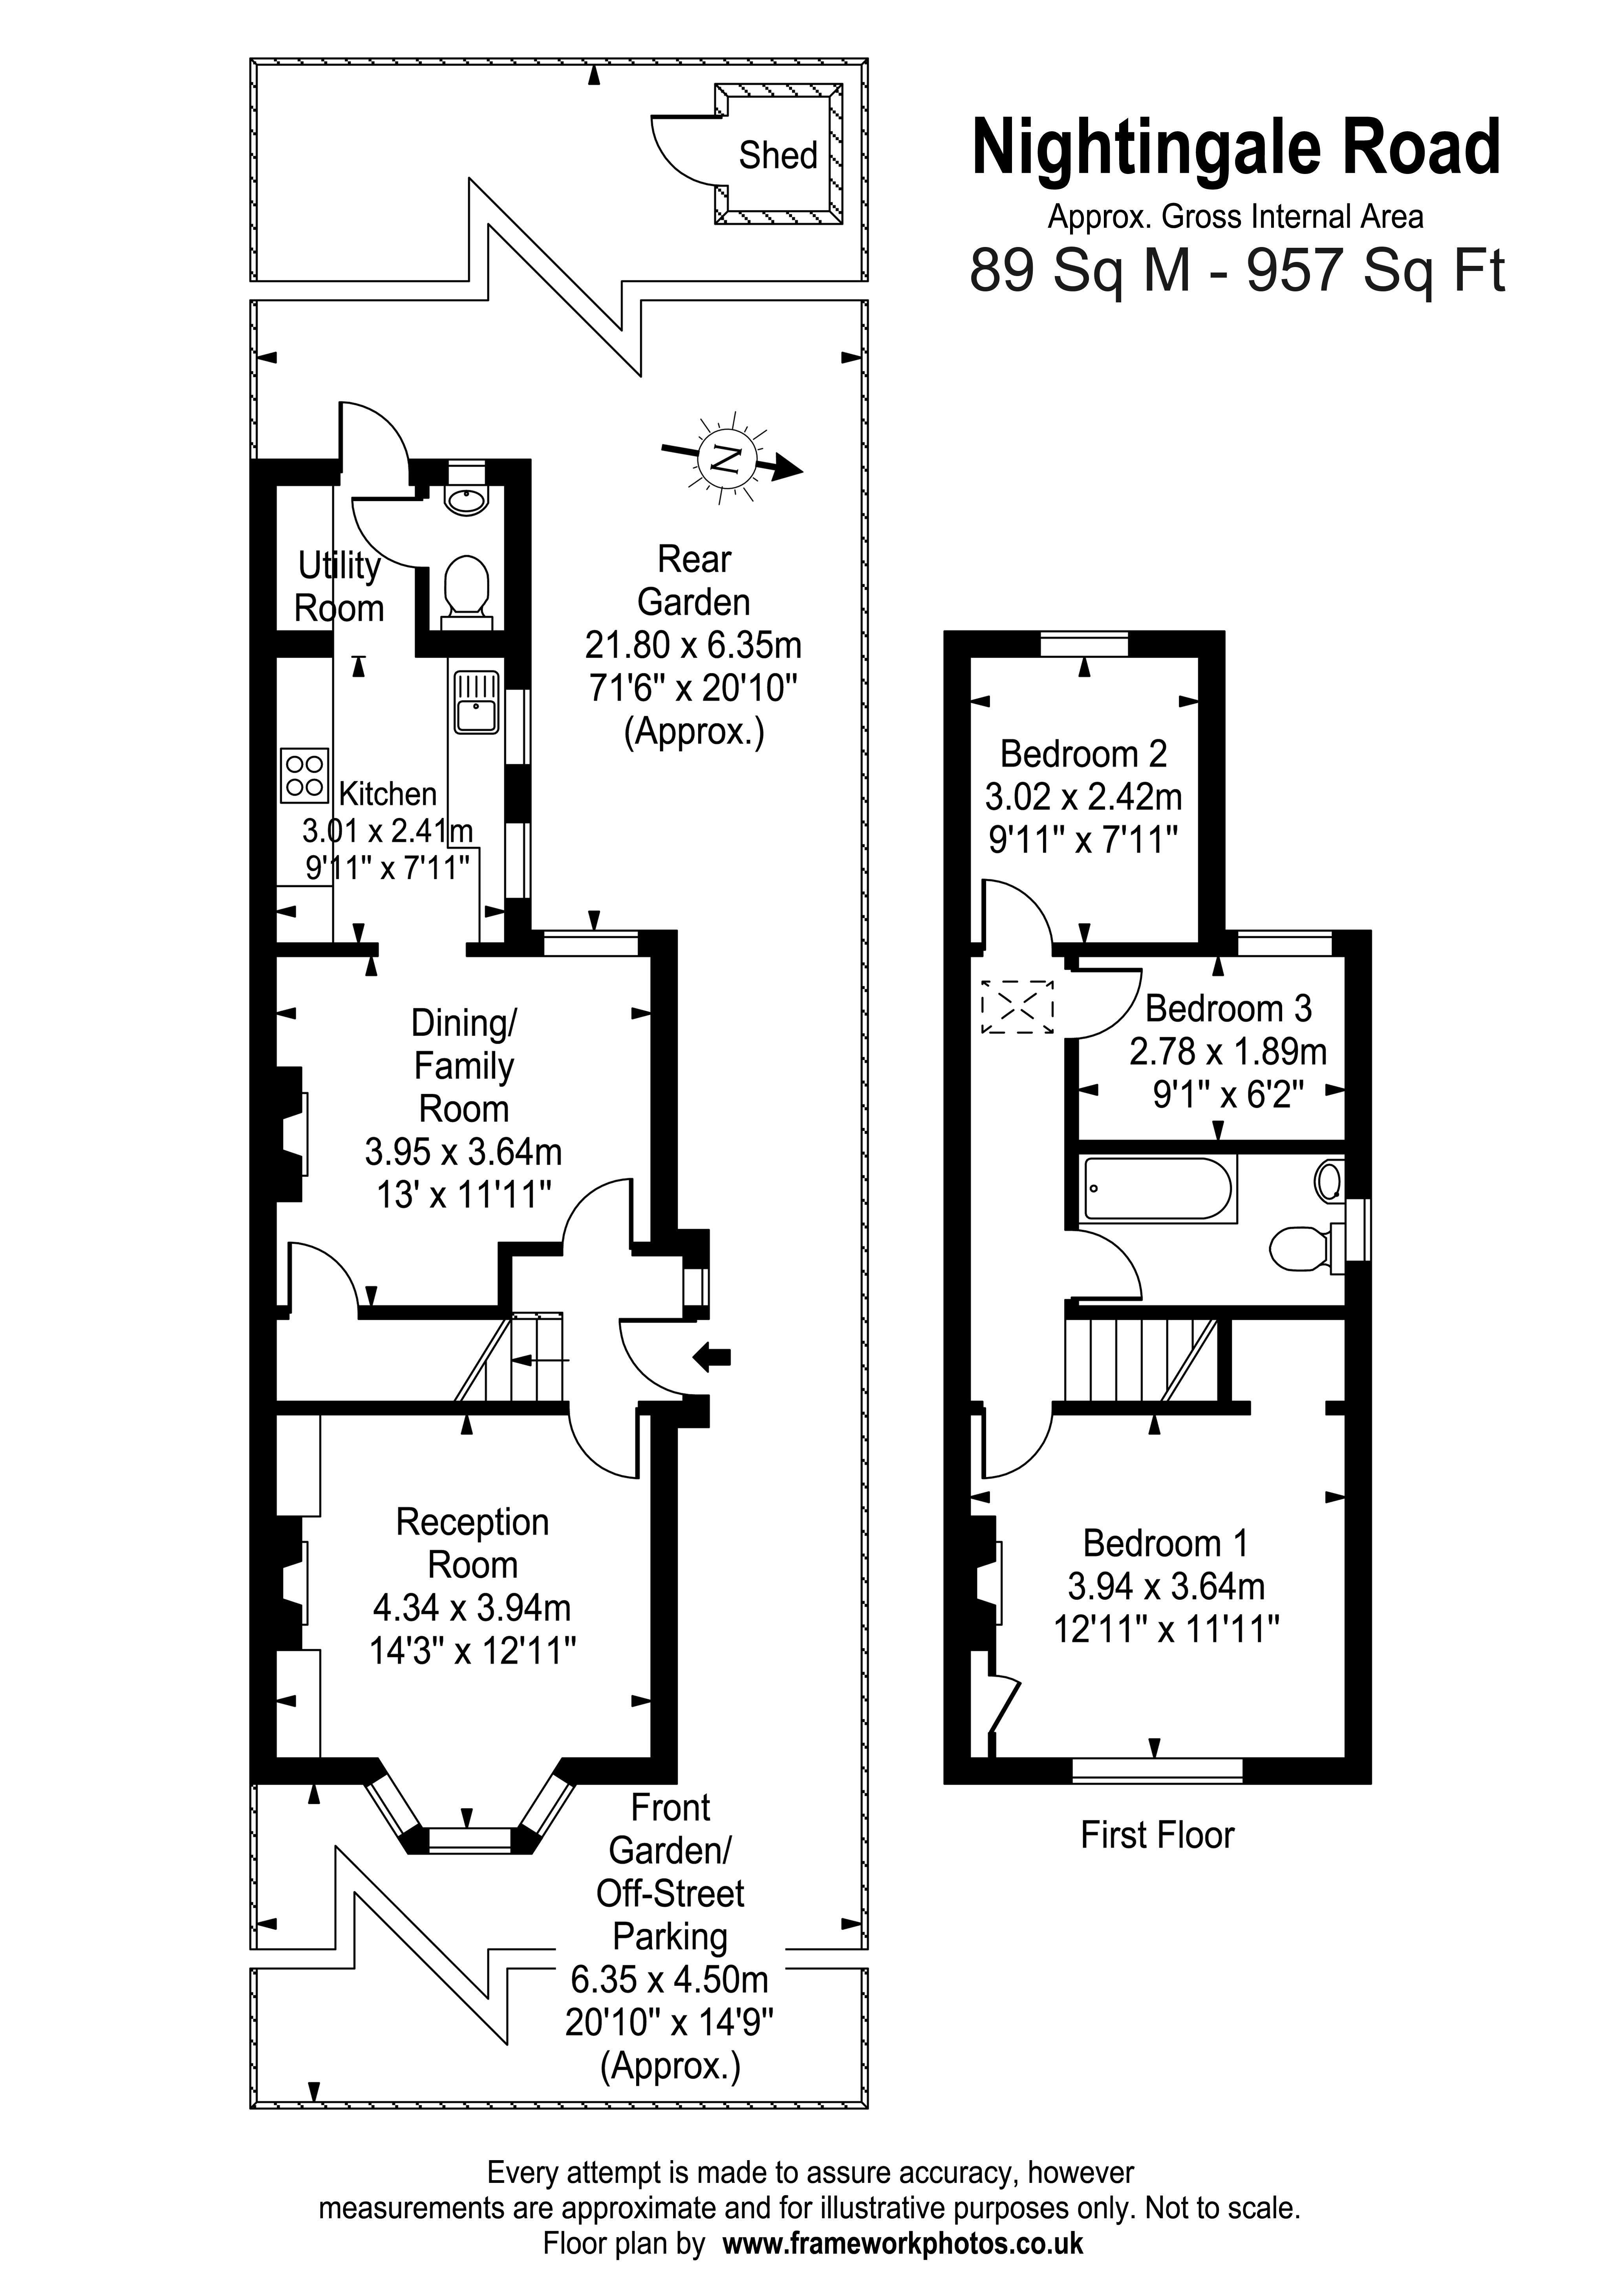 Floorplans For Nightingale Road, West Molesey